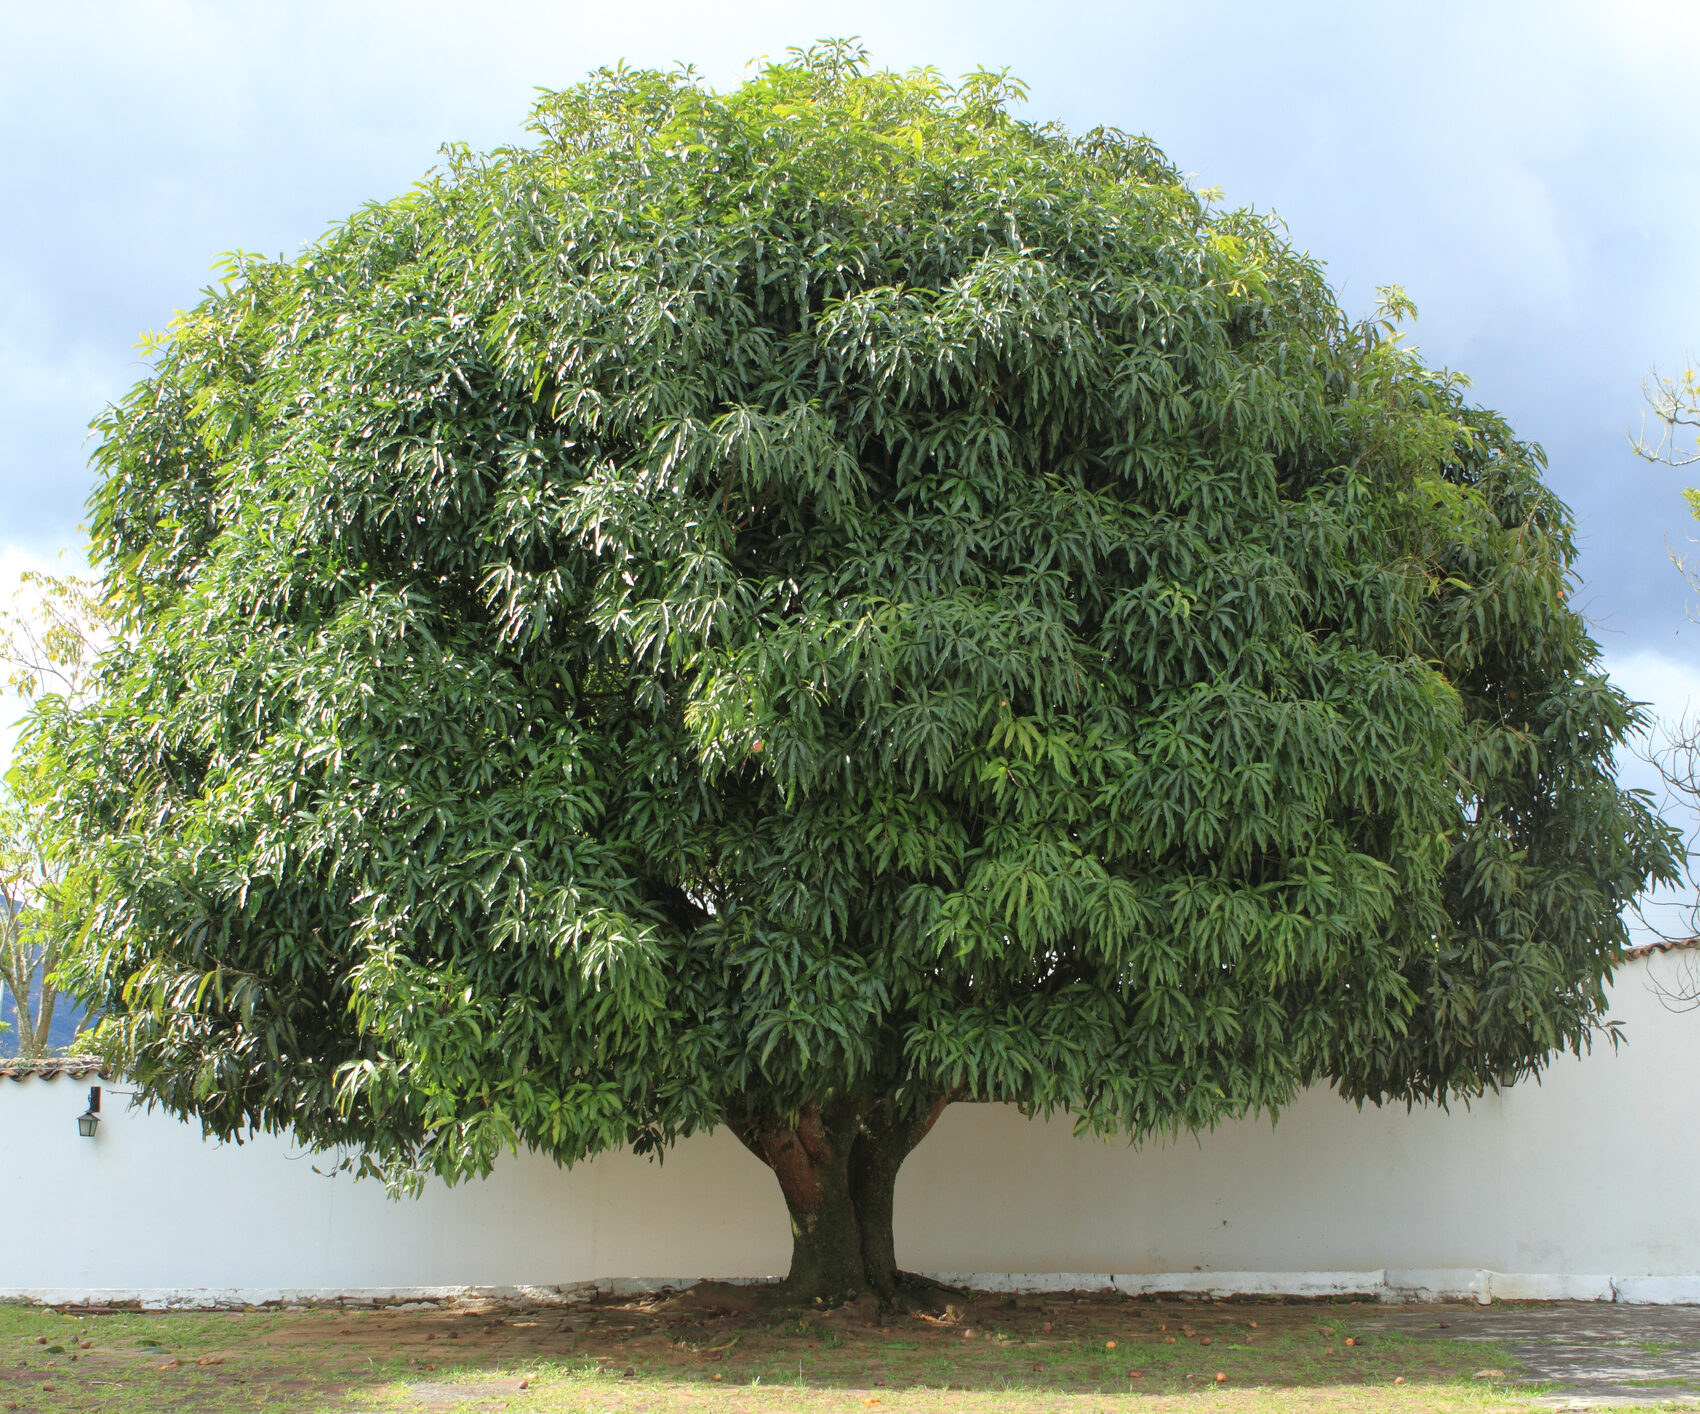 A big old mango tree with few fruits hanging from its branches. This tree grows easily in tropical warm and humid weather and it has a strong trunk and many branches which are lush or leafy forming a big crown. Mango is a very tasteful tropical fuit.